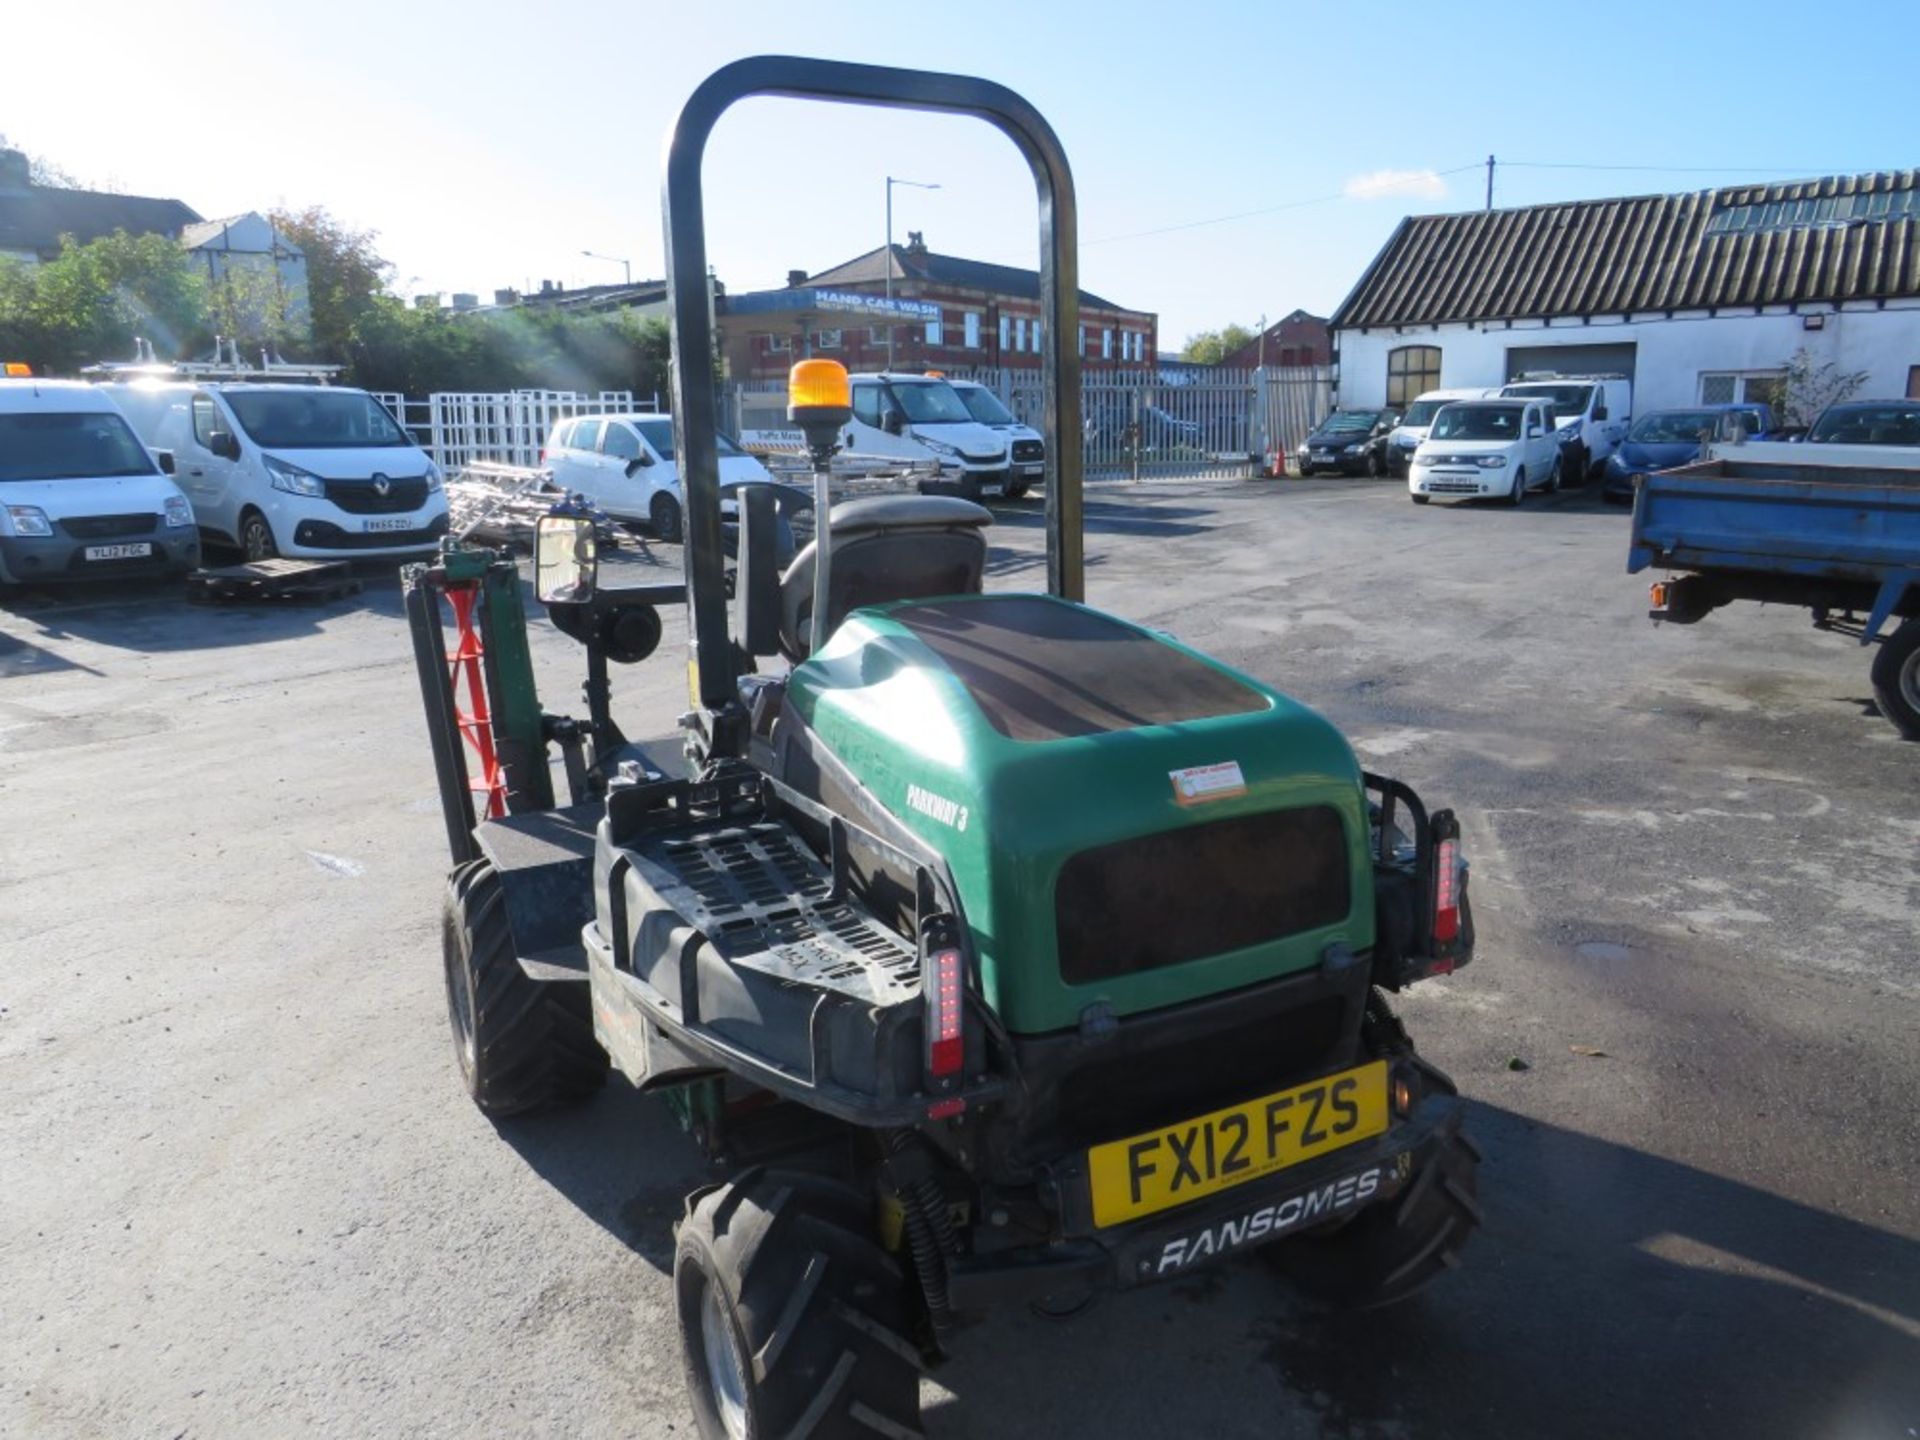 12 reg RANSOME PARKWAY 3 RIDE ON MOWER (DIRECT COUNCIL) 1ST REG 04/12, 2048 HOURS, V5 HERE, 1 FORMER - Image 4 of 6